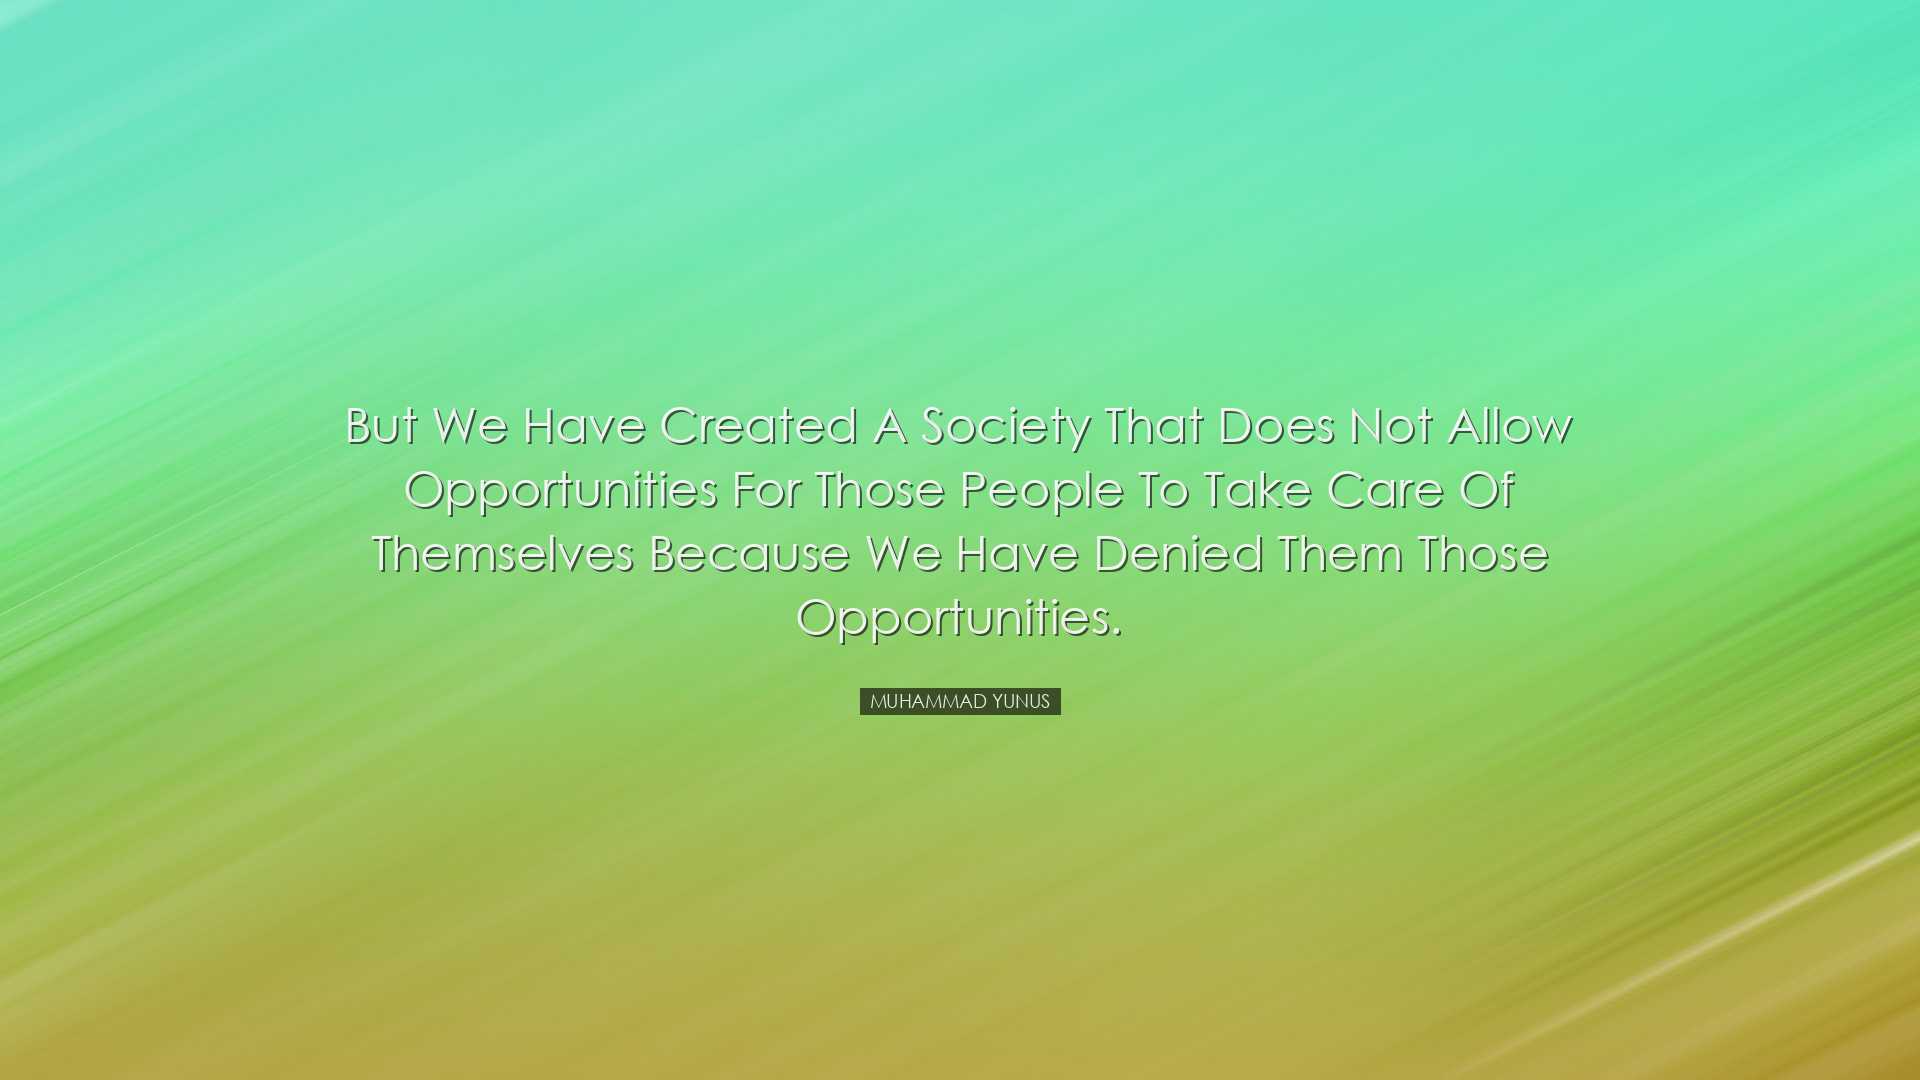 But we have created a society that does not allow opportunities fo